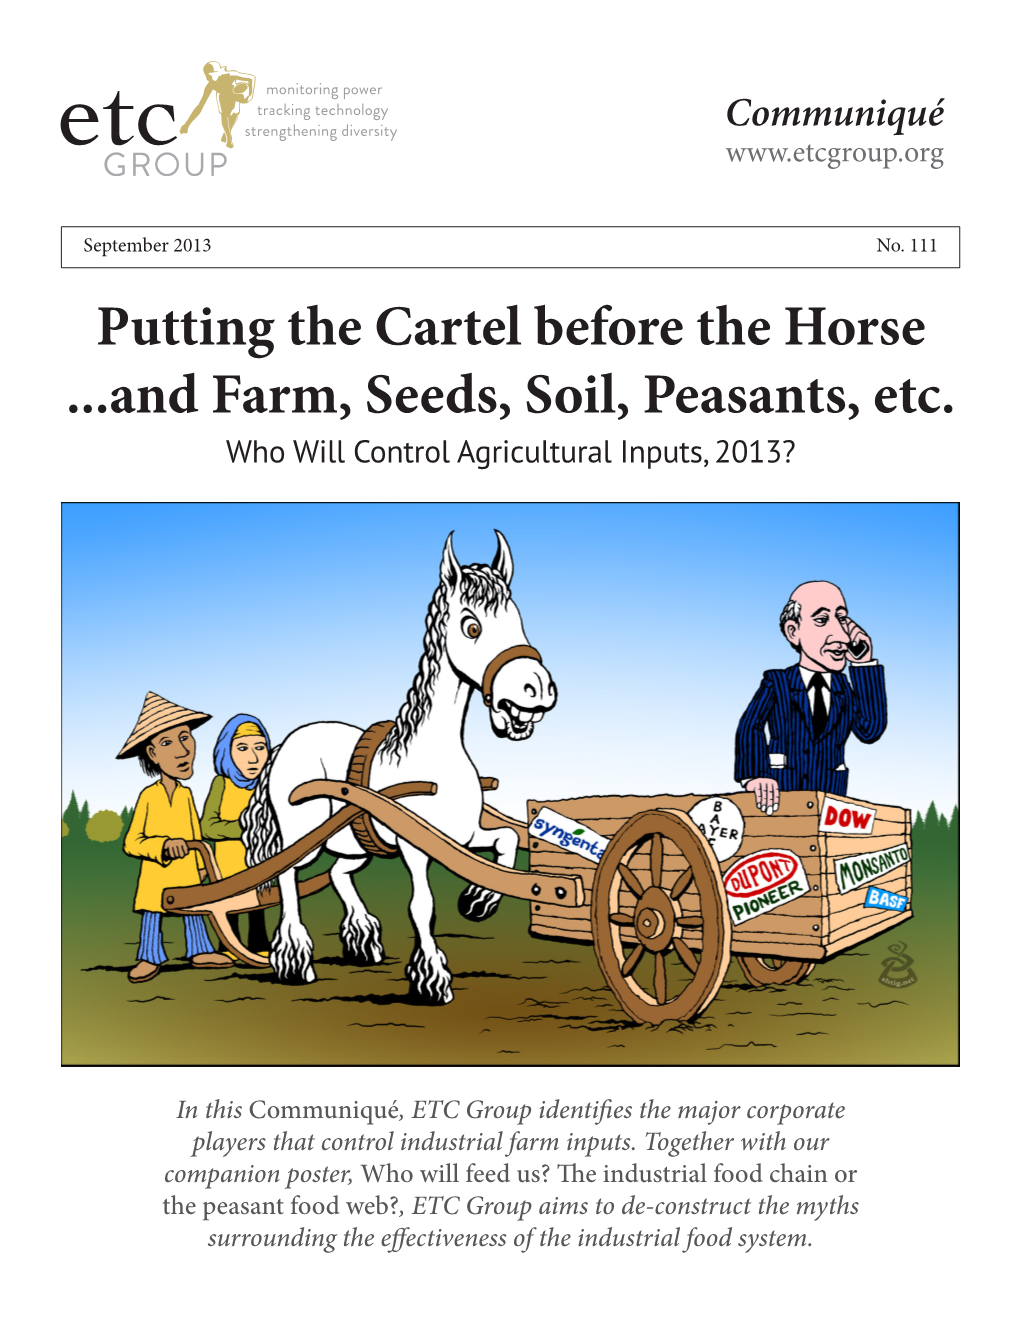 Putting the Cartel Before the Horse ...And Farm, Seeds, Soil, Peasants, Etc